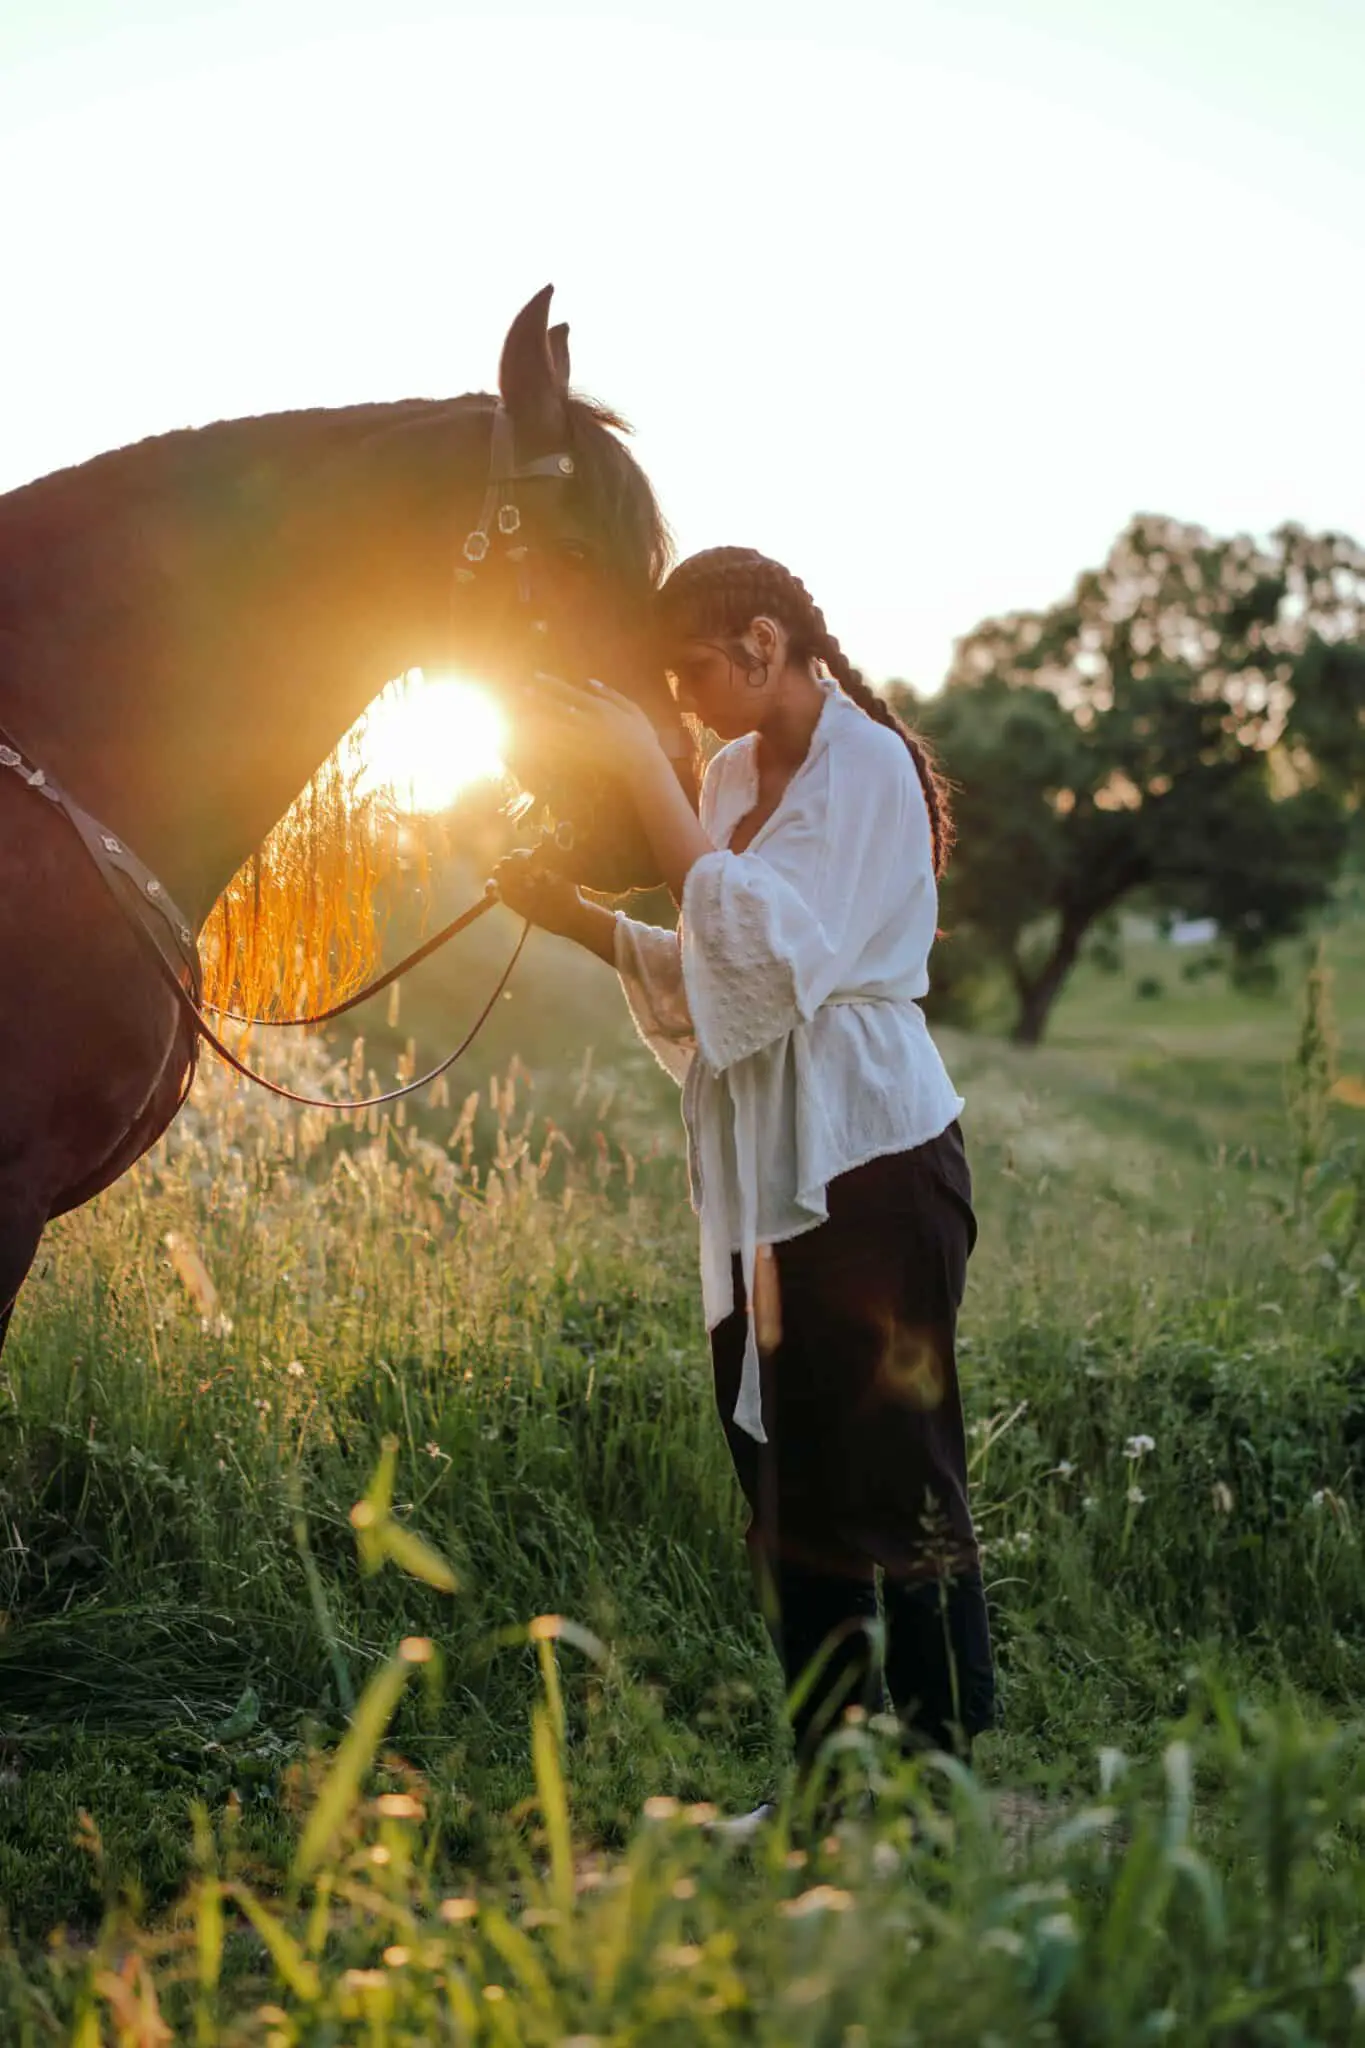 senior picture ideas for horse lovers